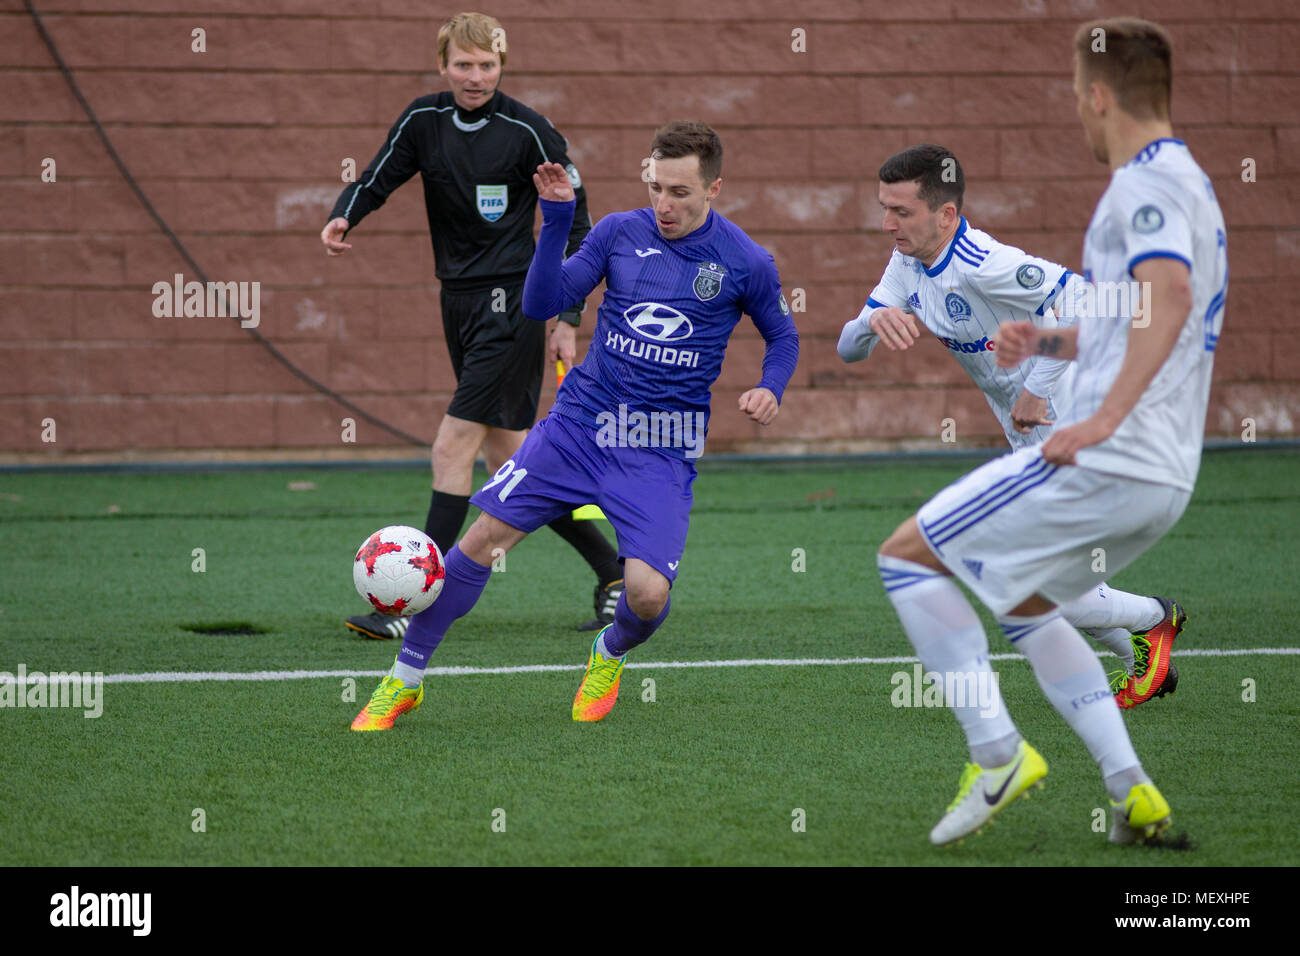 MINSK, BELARUS - APRIL 7, 2018: Soccer players during the Belarusian Premier League football match between FC Dynamo Minsk and FC Isloch at the FC Minsk Stadium. Stock Photo